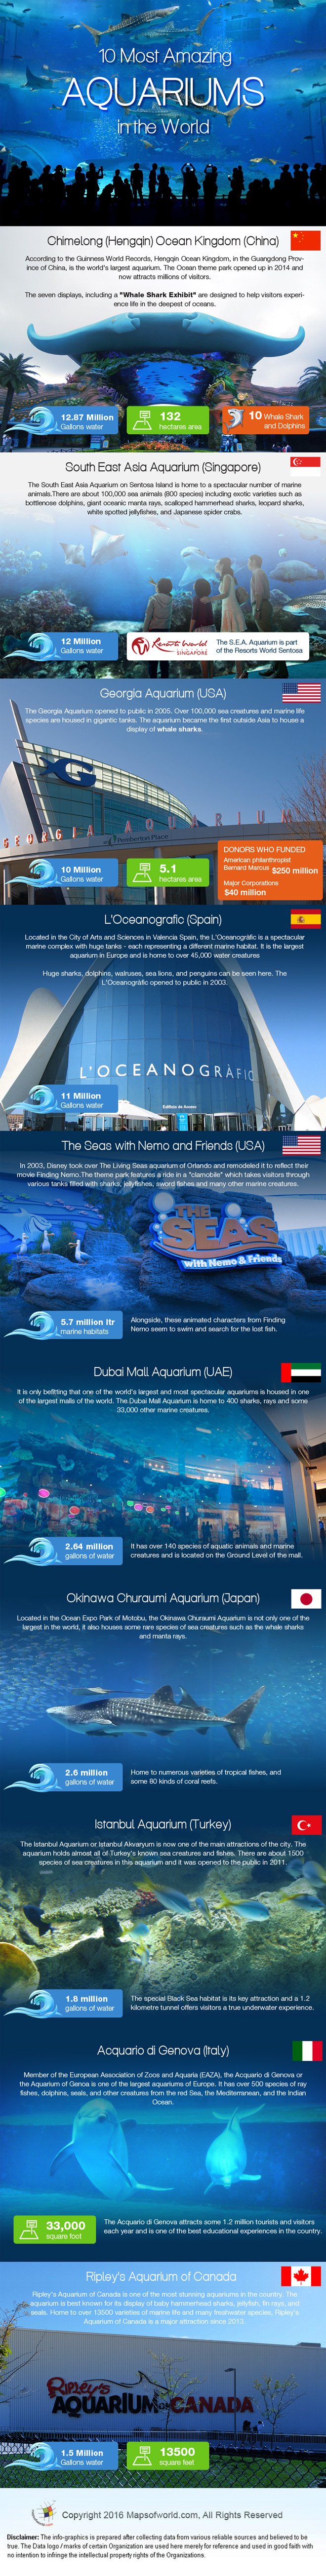 Infographic on 10 Most Amazing Aquariums in the World